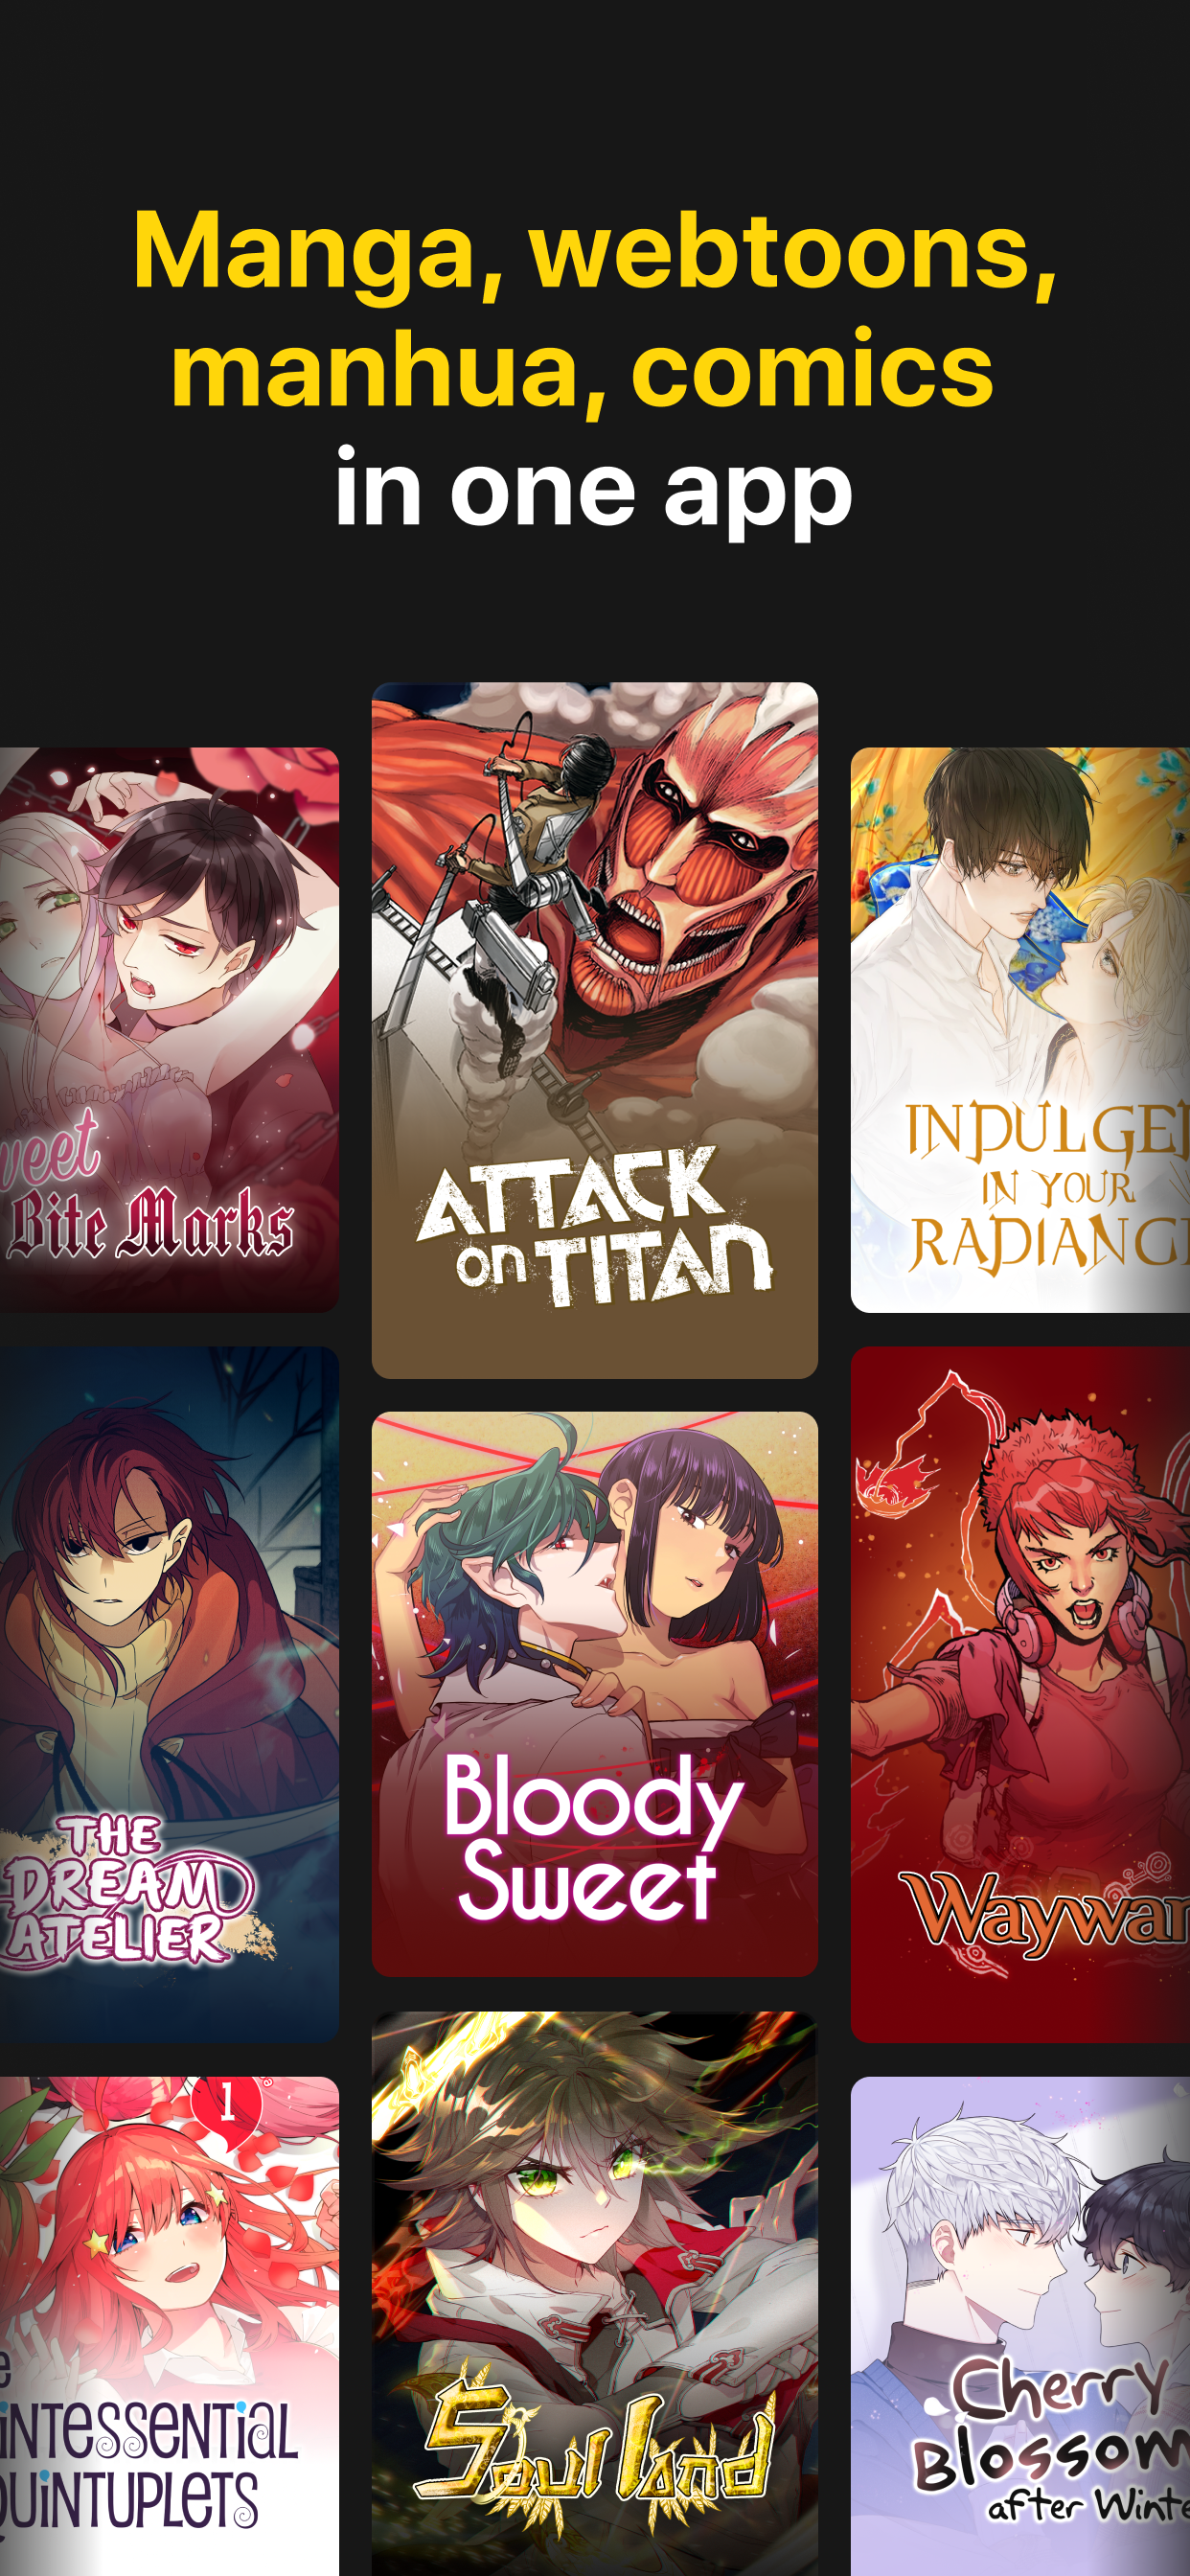 A screenshot with some of the titles on digital comics platform INKR